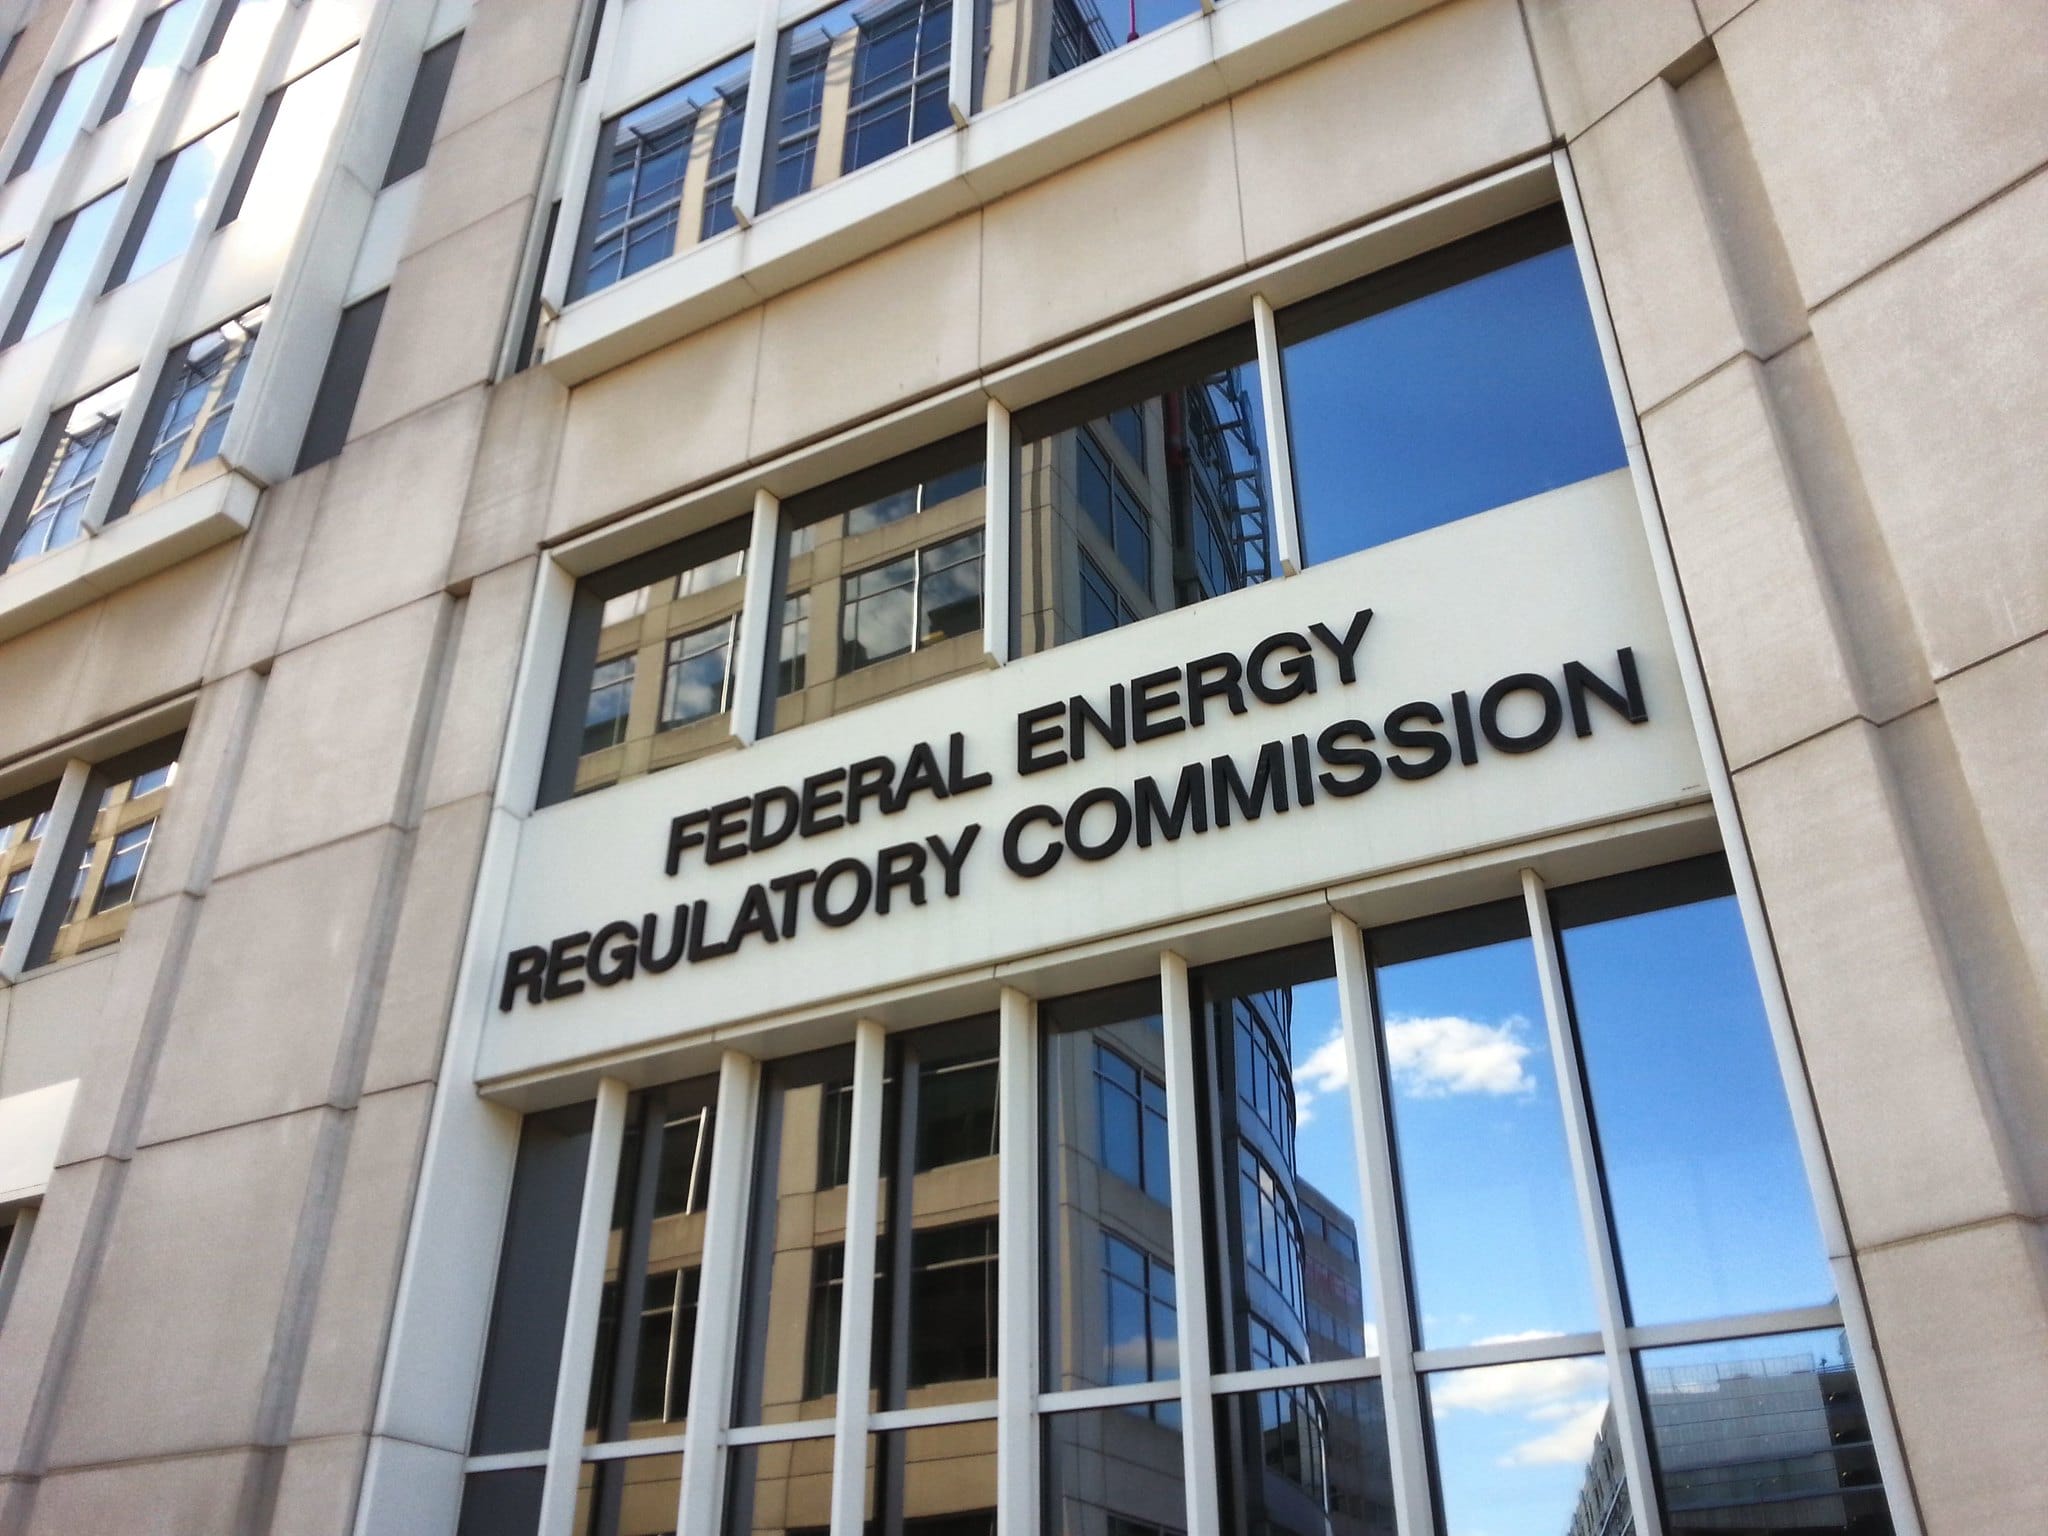 Documents show TC Energy's contractors did not report conflicts of interest to FERC